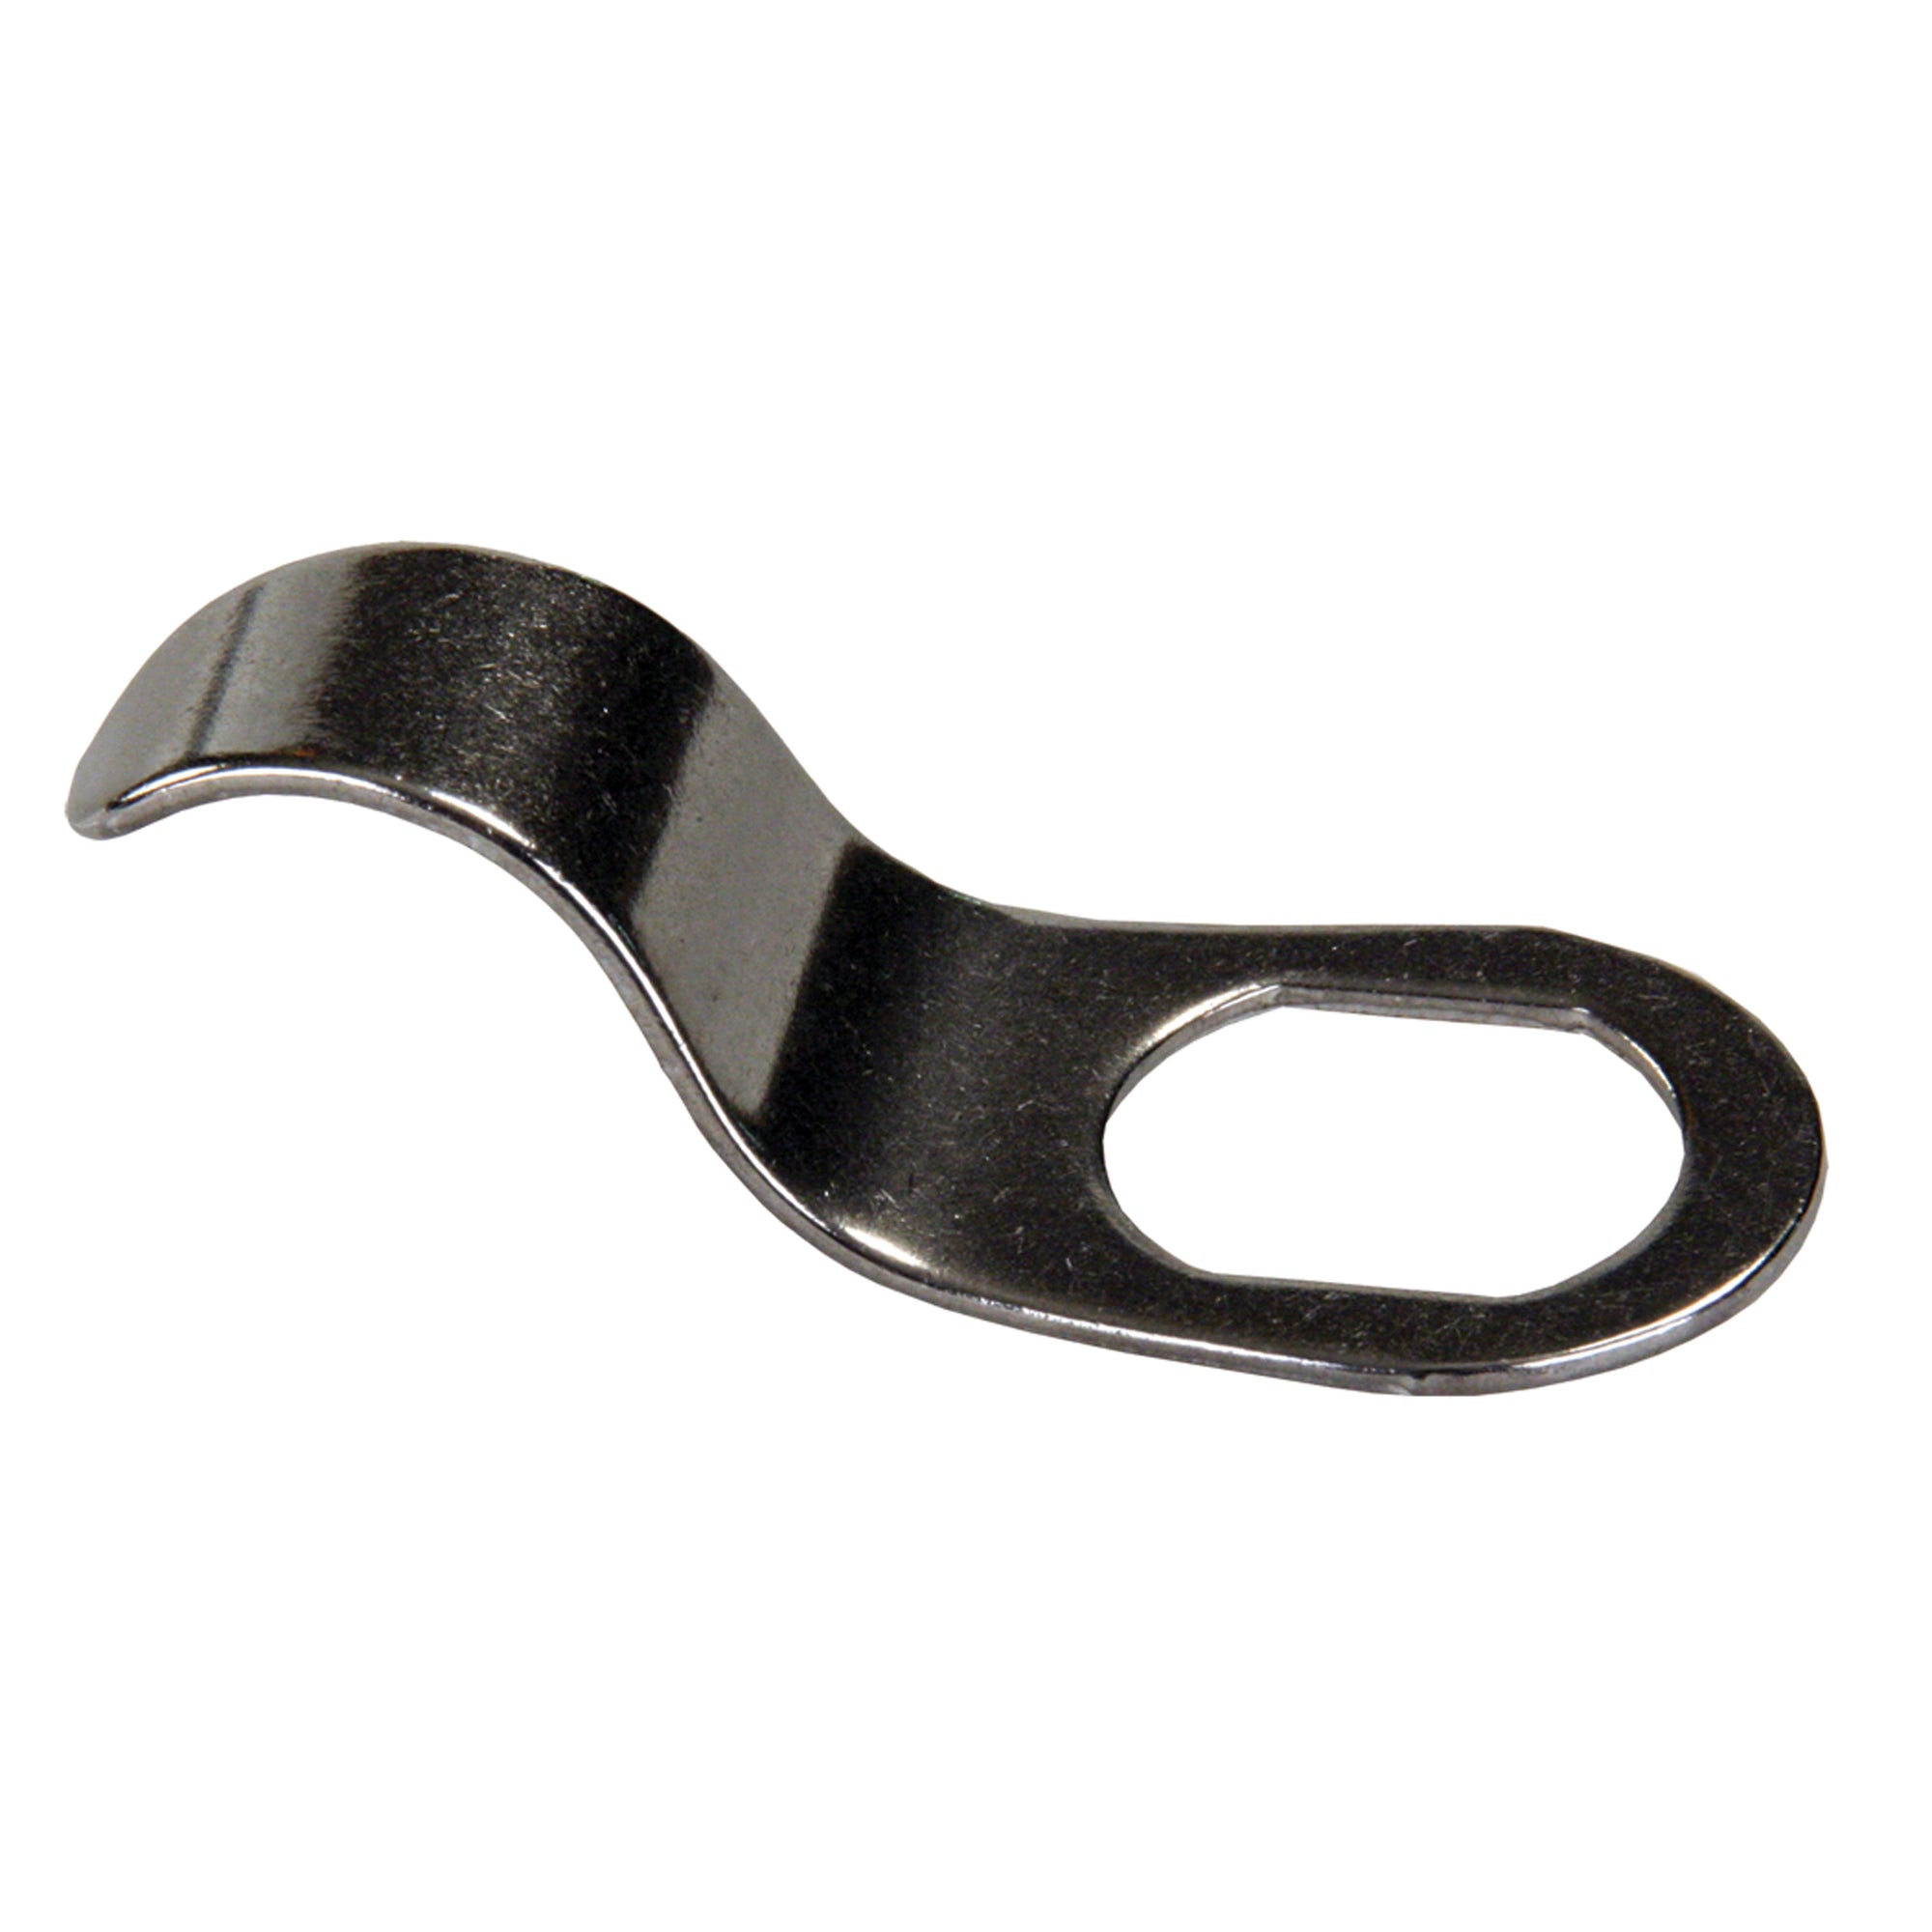 JR Products 00195 Stainless Steel Finger Pull